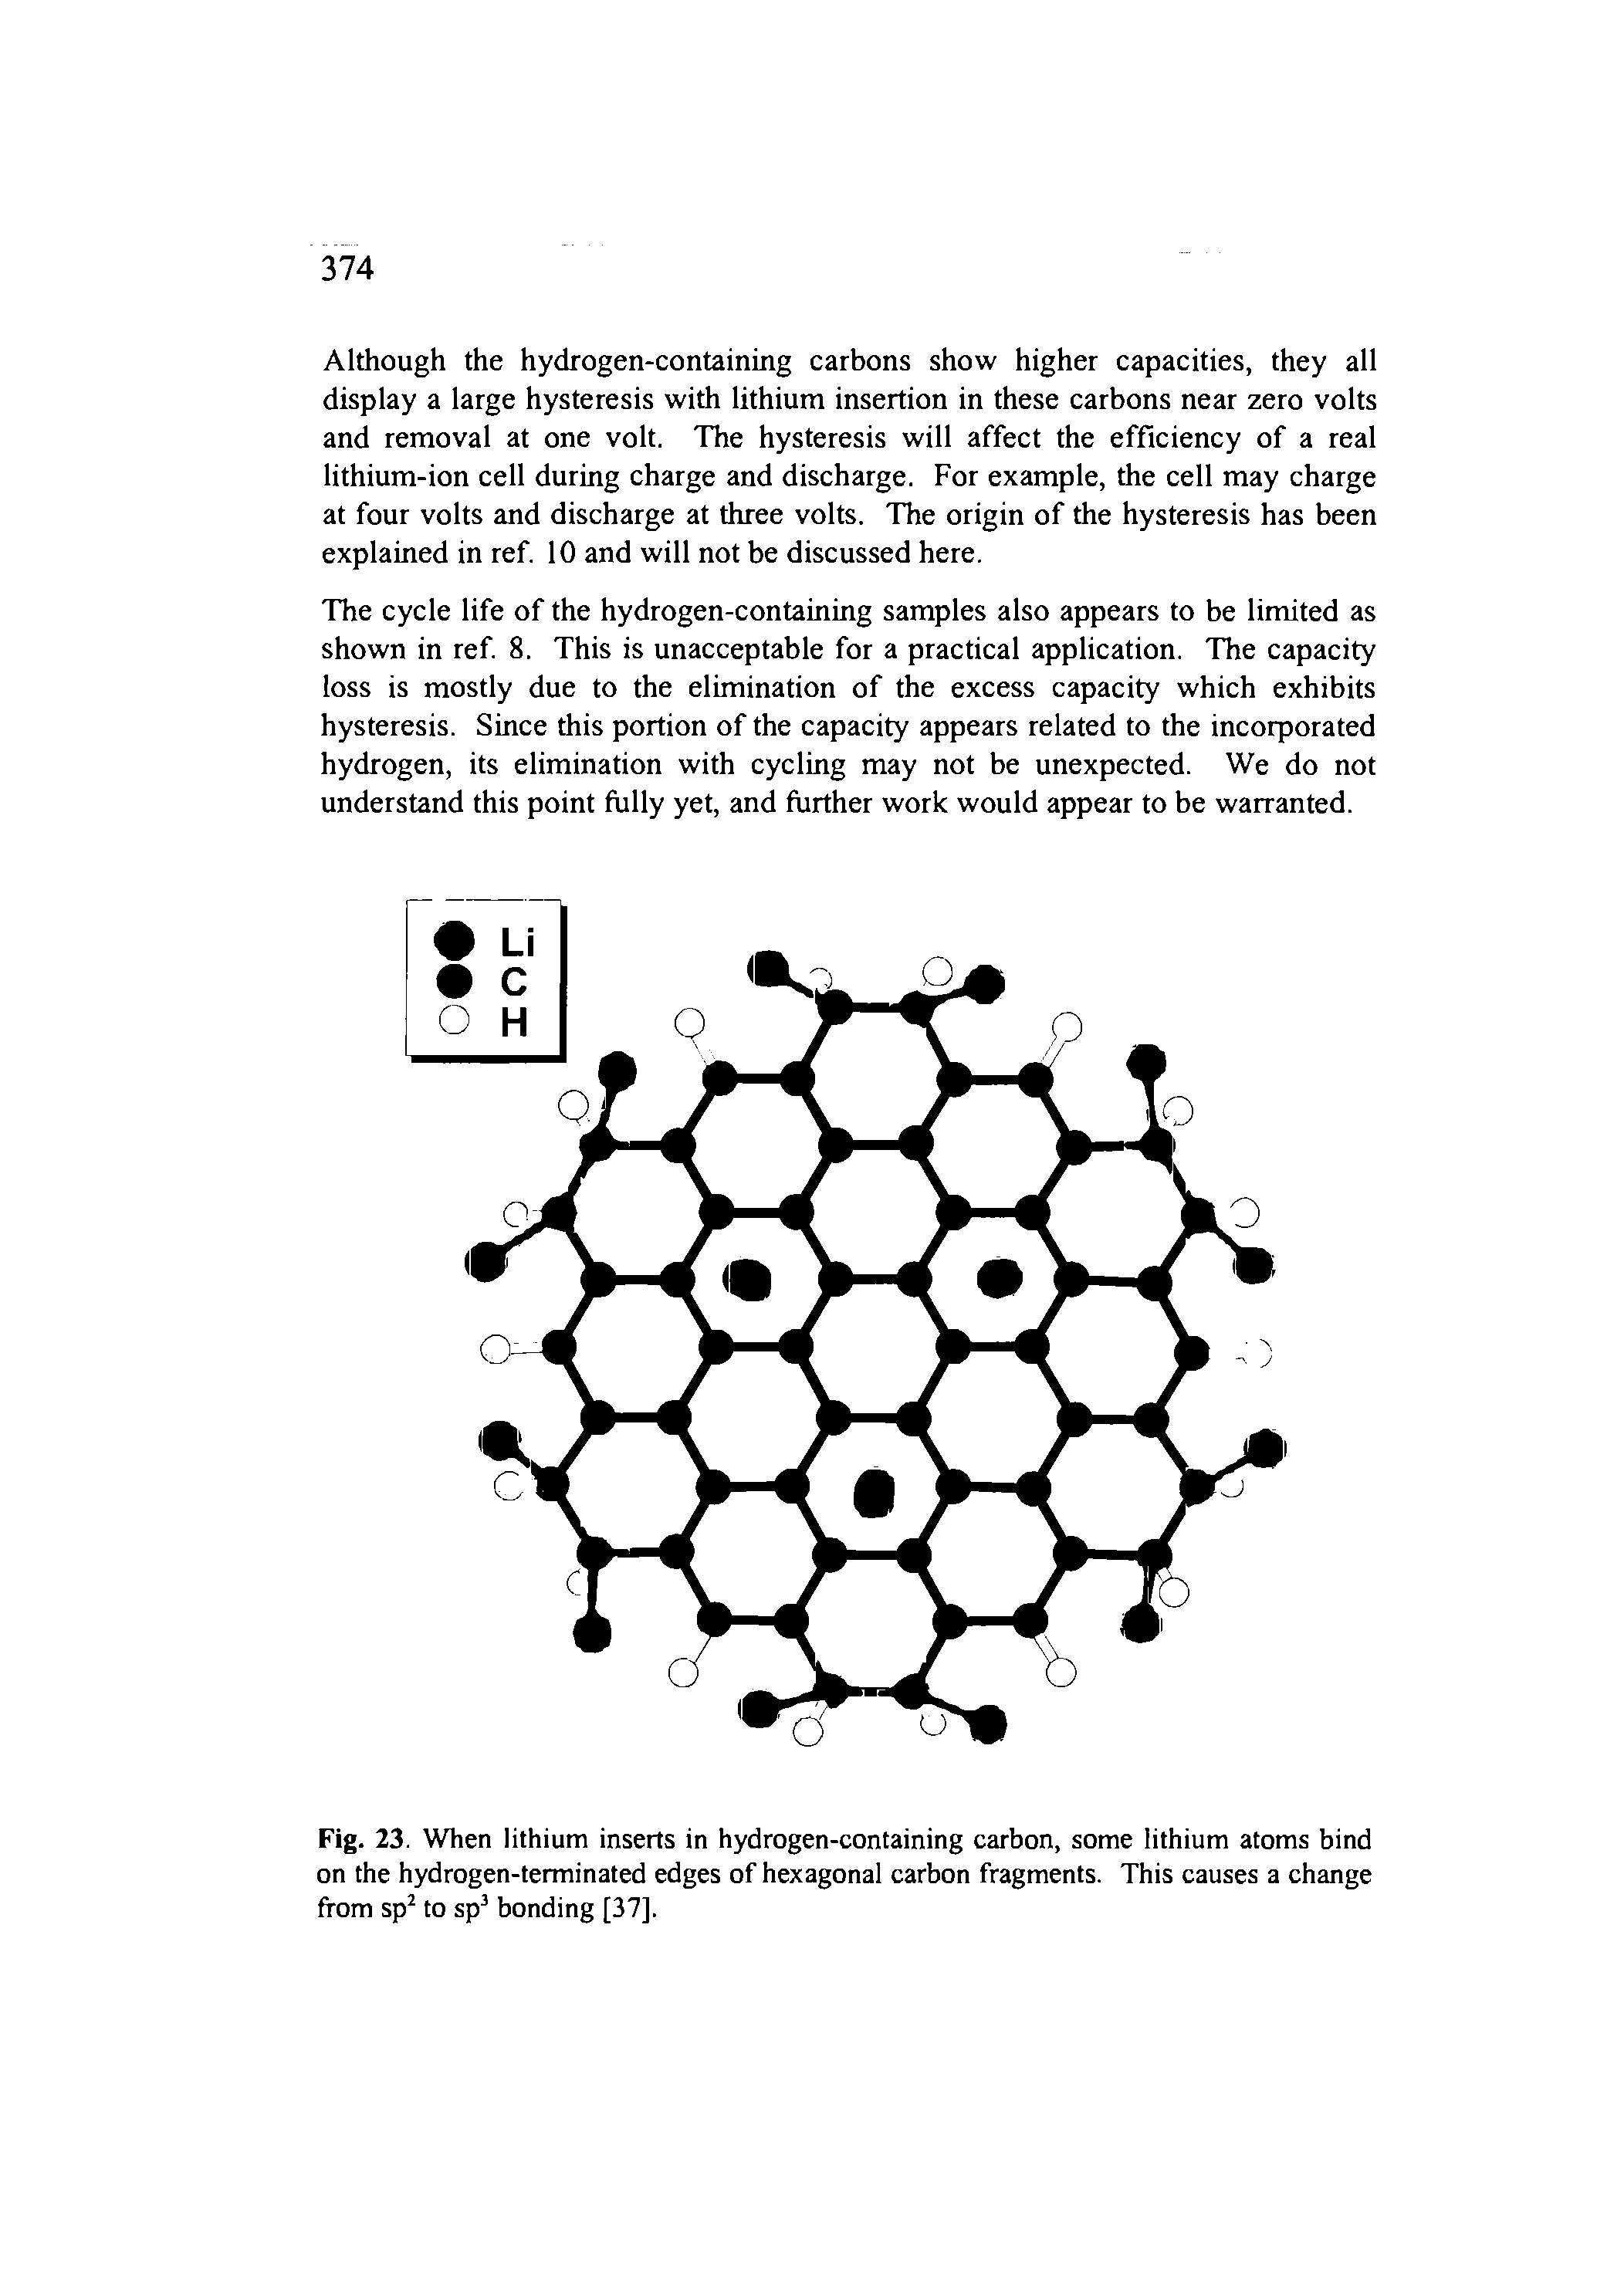 Fig. 23. When lithium inserts in hydrogen-containing carbon, some lithium atoms bind on the hydrogen-terminated edges of hexagonal carbon fragments. This causes a change from sp to sp bonding [37].